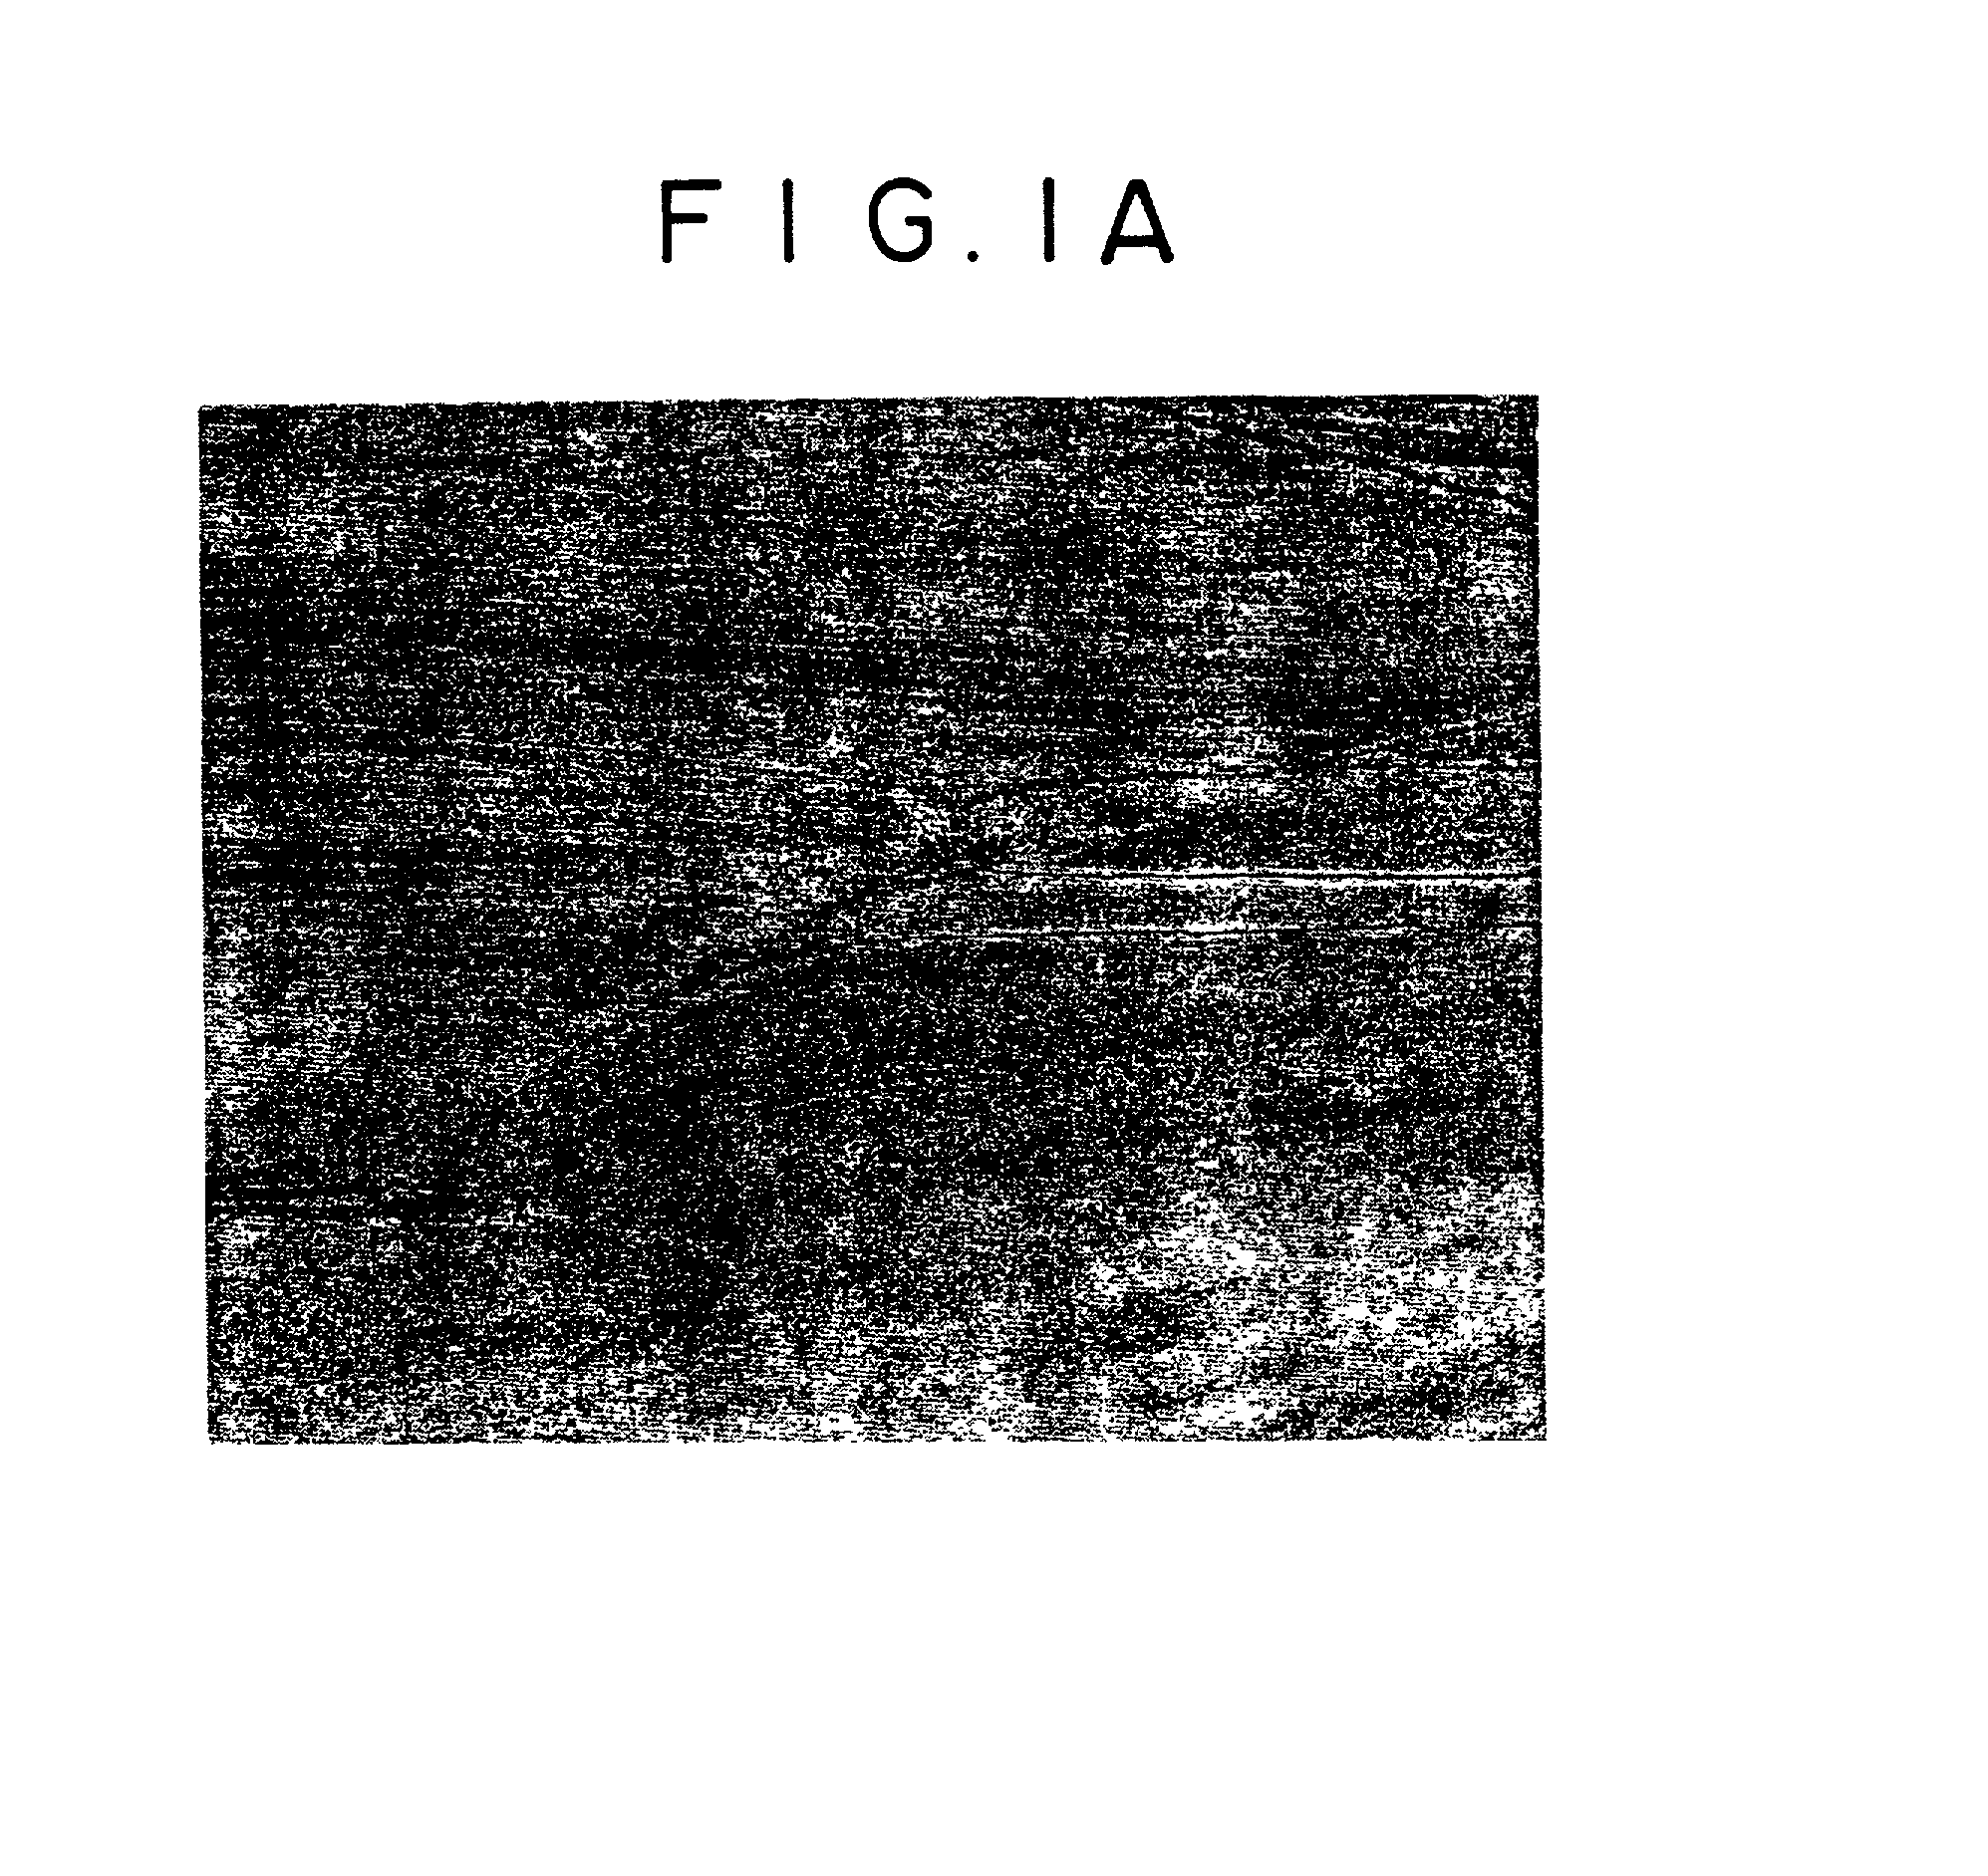 Titanium alloy and production thereof